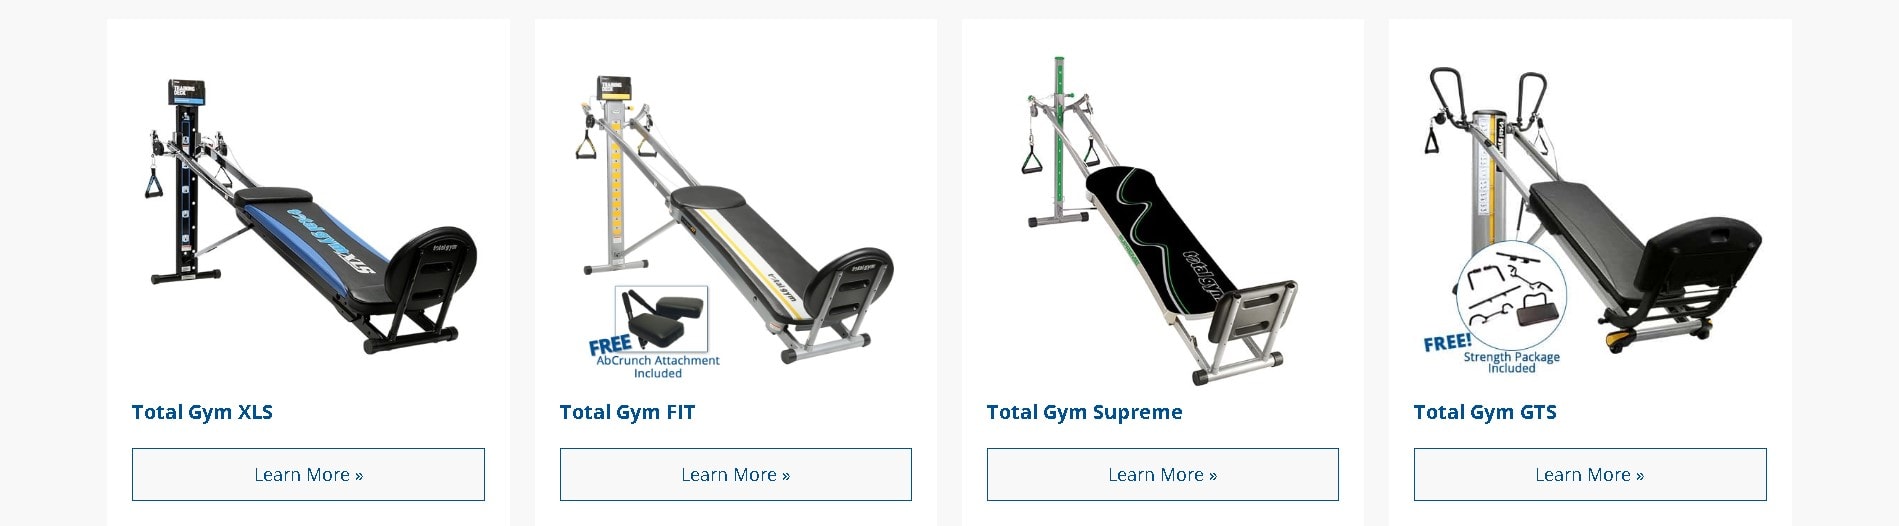 Total Gym Direct Review